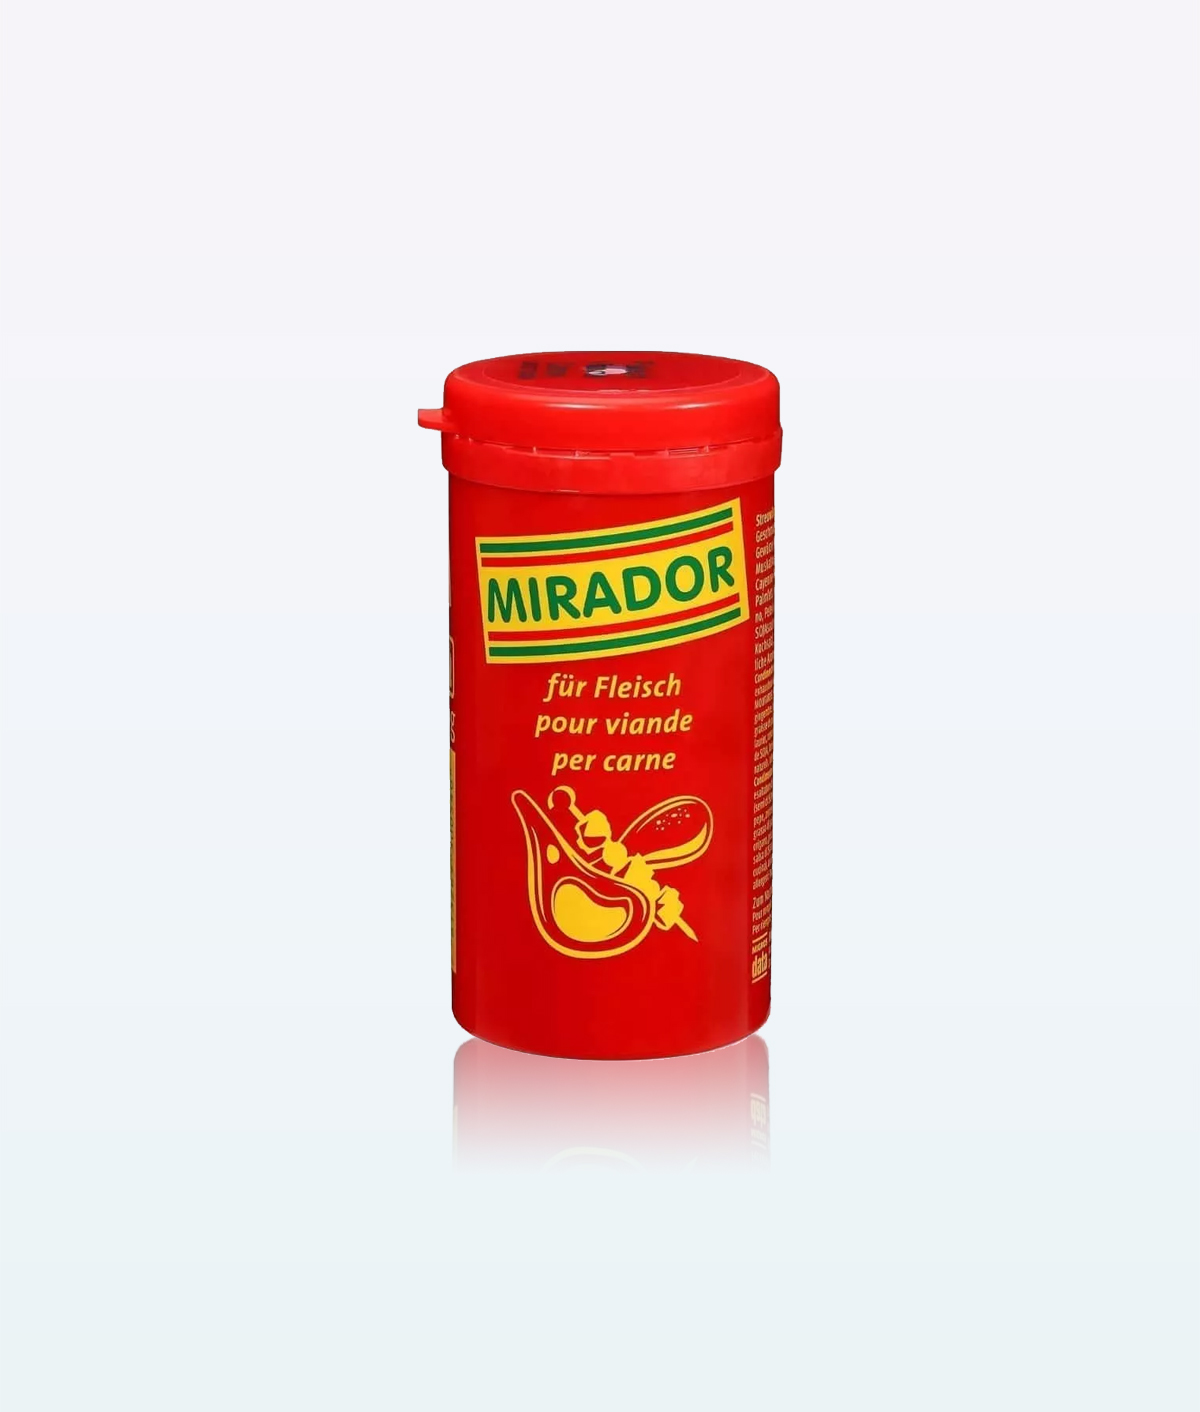 Mirador Spice for Meat 90g